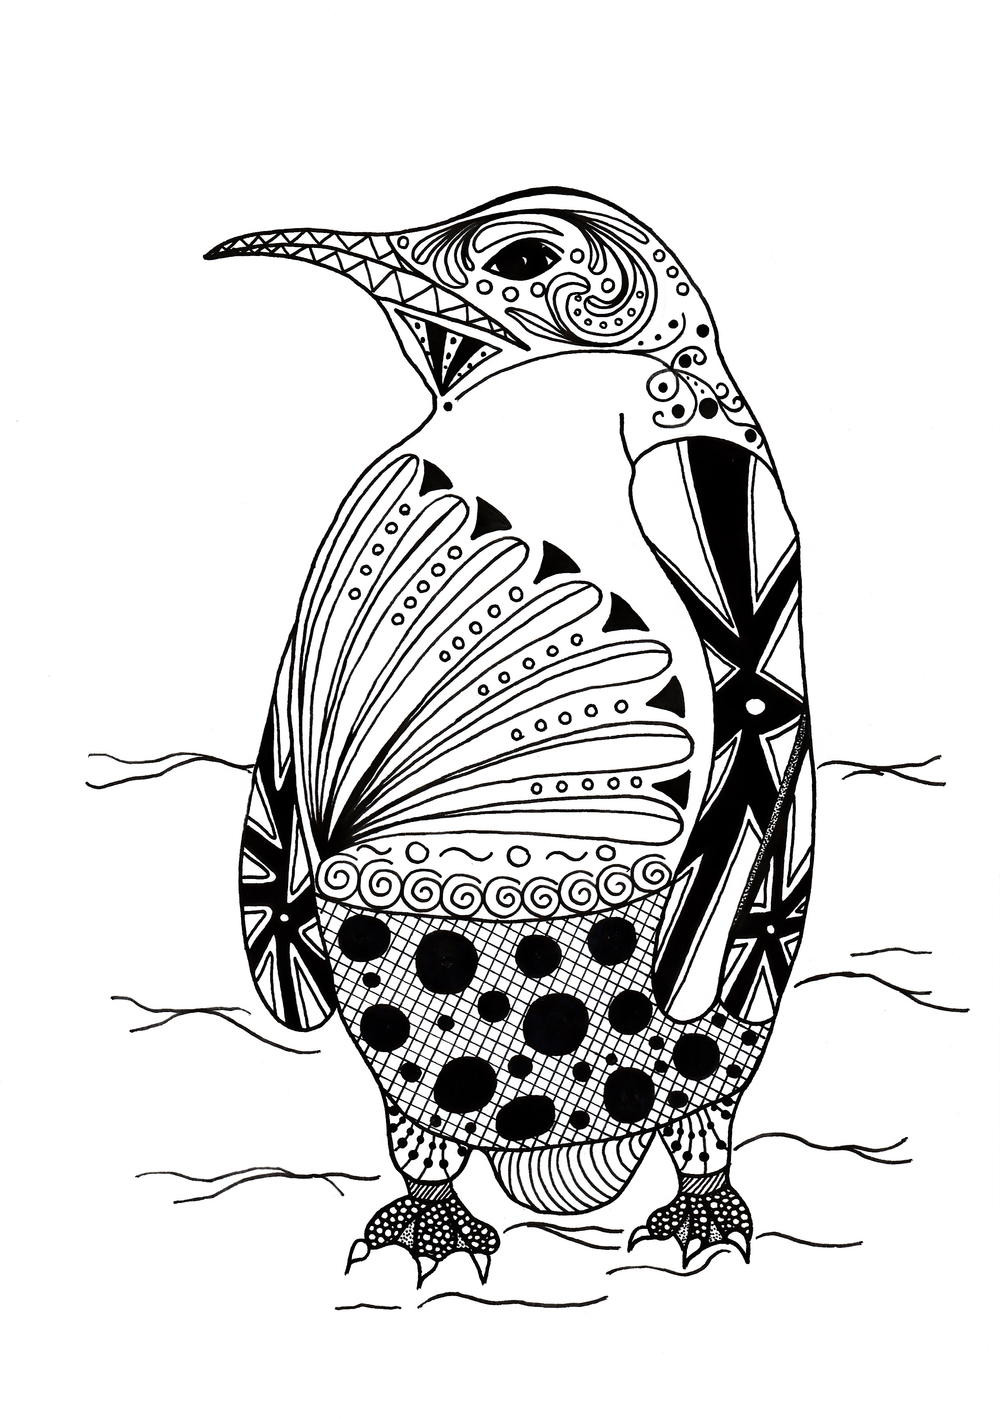 Adult Coloring Books Animals
 Intricate Penguin Adult Coloring Page